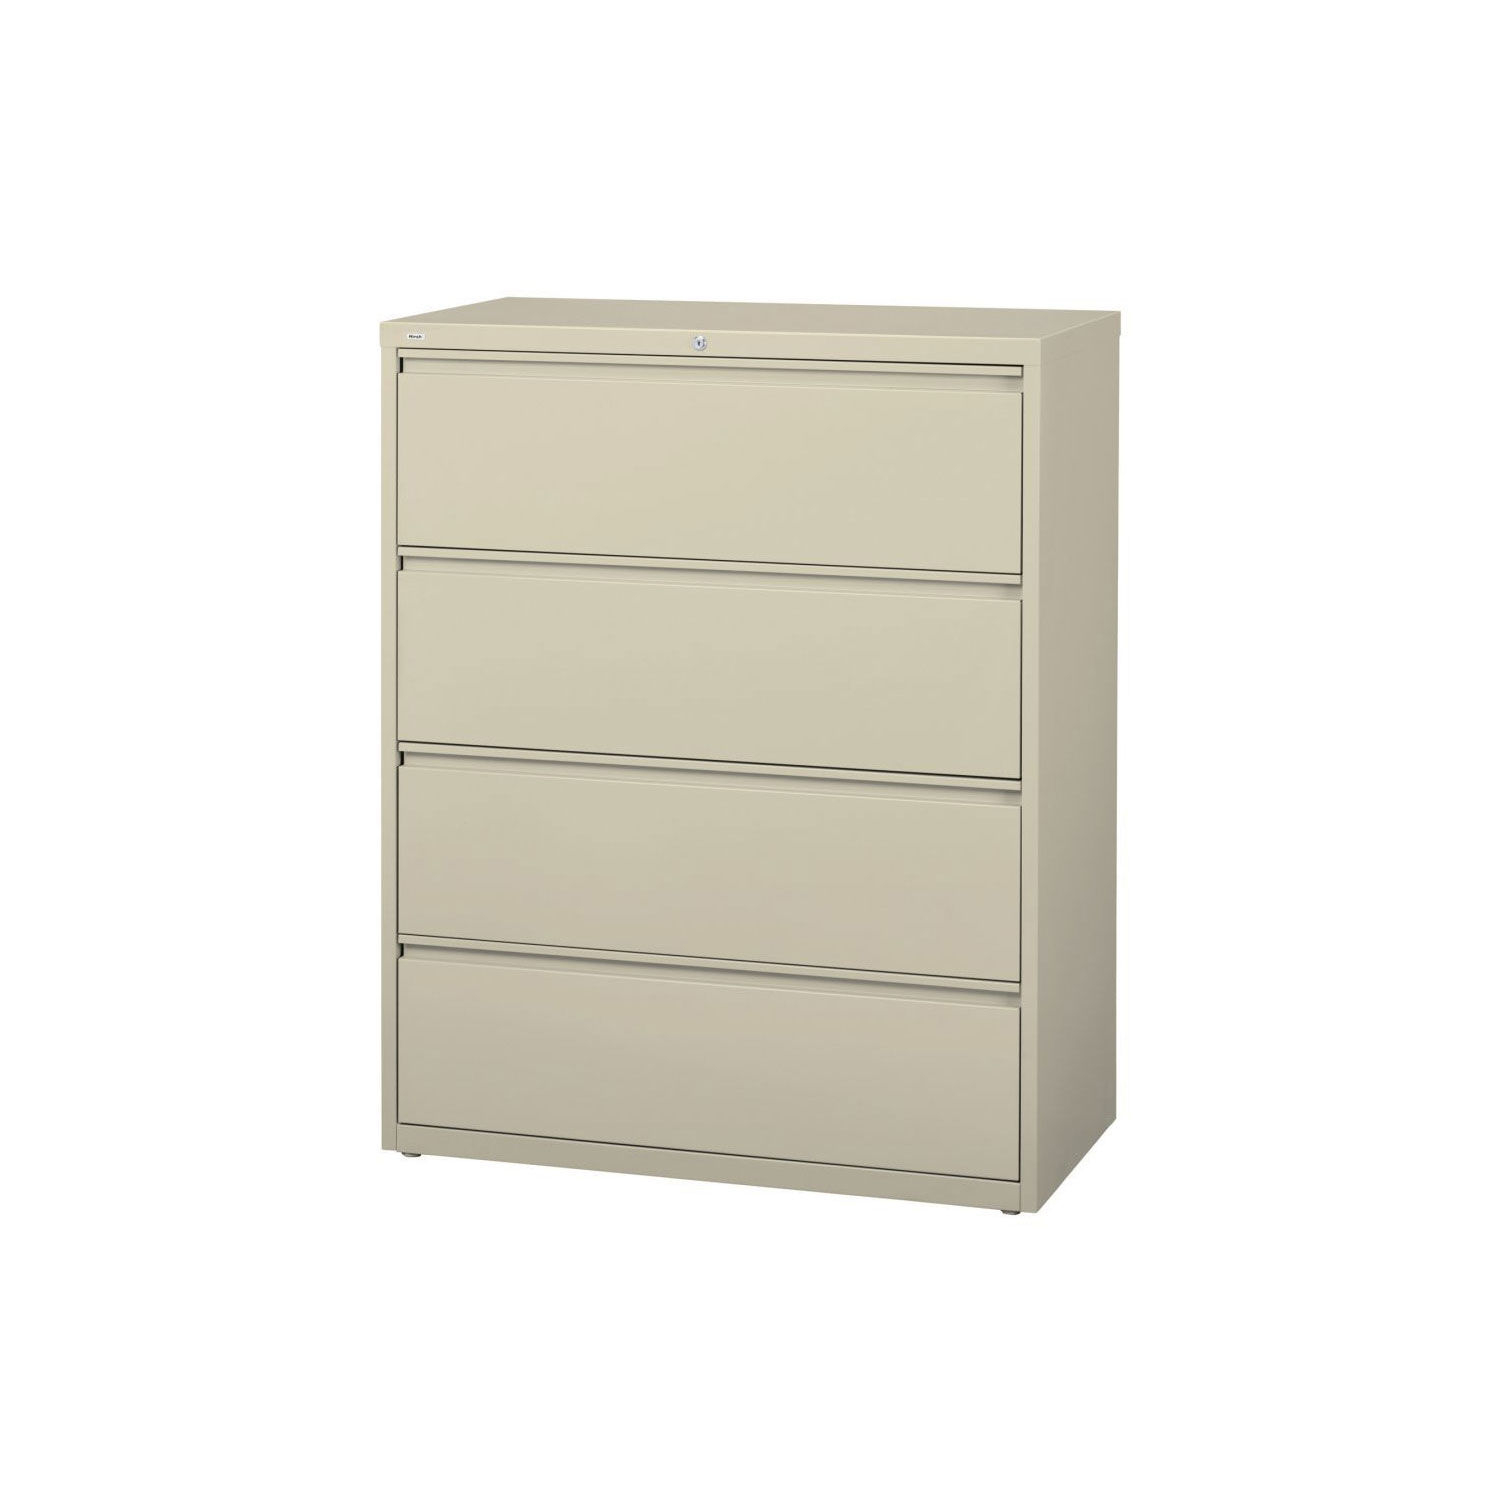 Lorell Llr60444 4 Drawer Lateral File Cabinet 36w X 18 58d X 52 within proportions 1500 X 1500